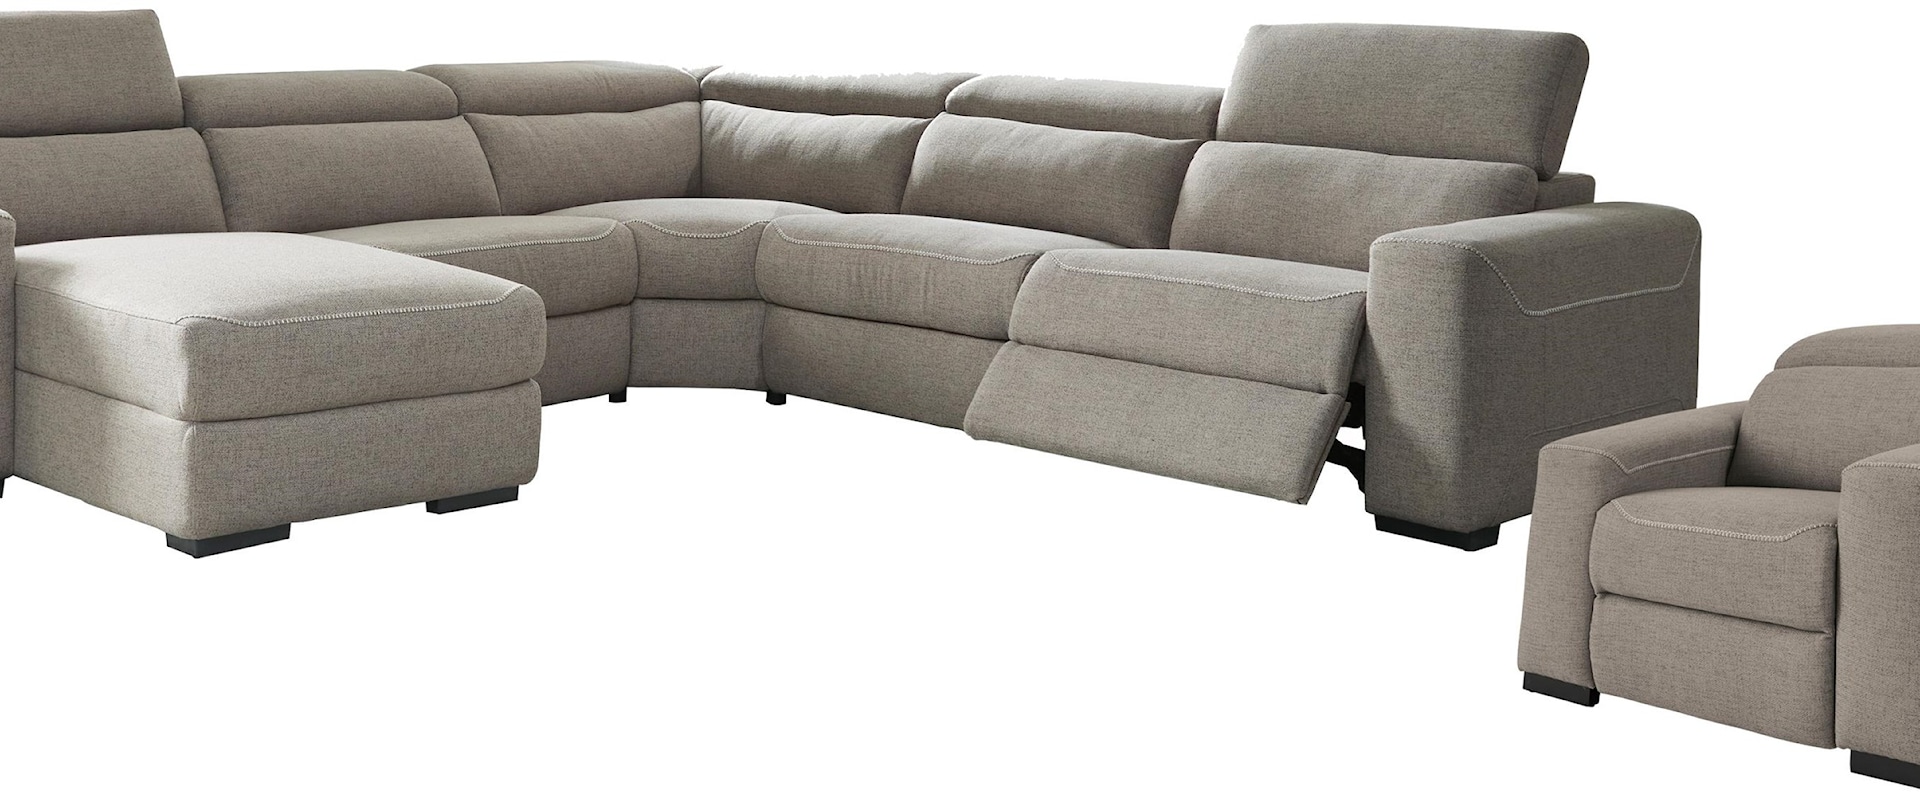 5 Piece Power Reclining Sectional Sofa Chaise and Power Recliner Set